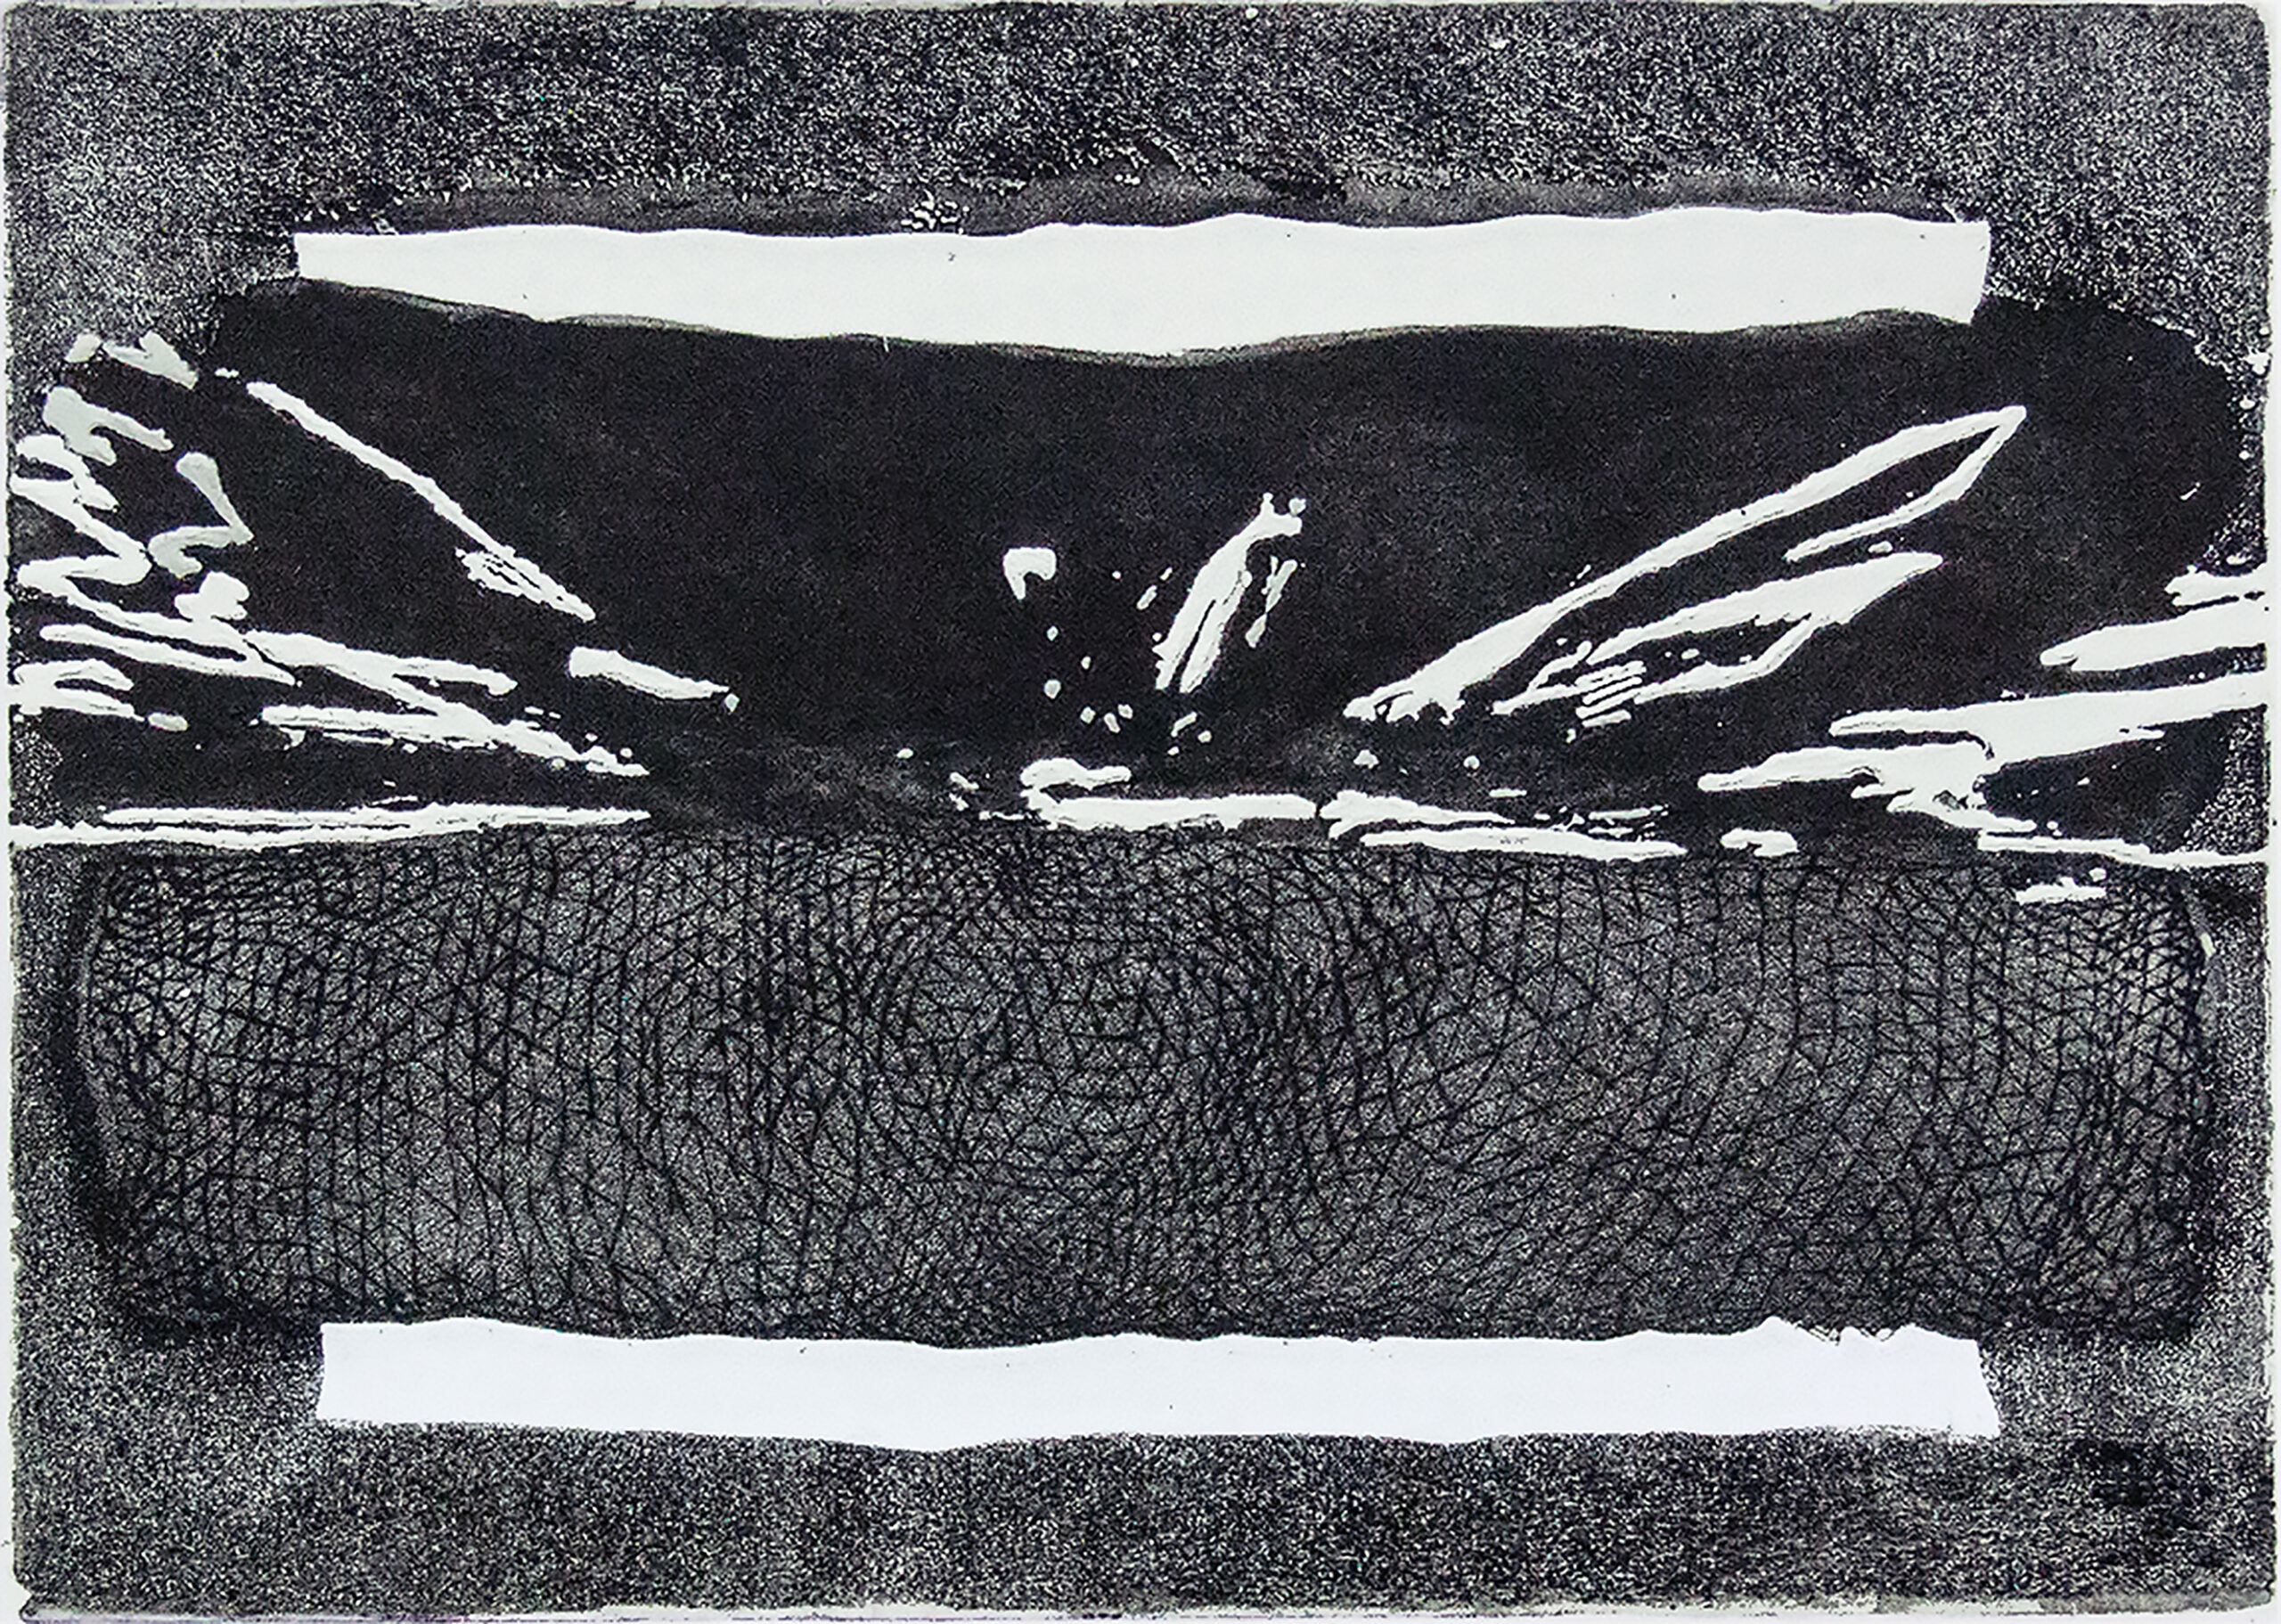 project 3'3-Dark energy I-48.4 × 68.6cm- 材料：copperplate，Fabriano paper ；技法：ecthing，aquatint 2015